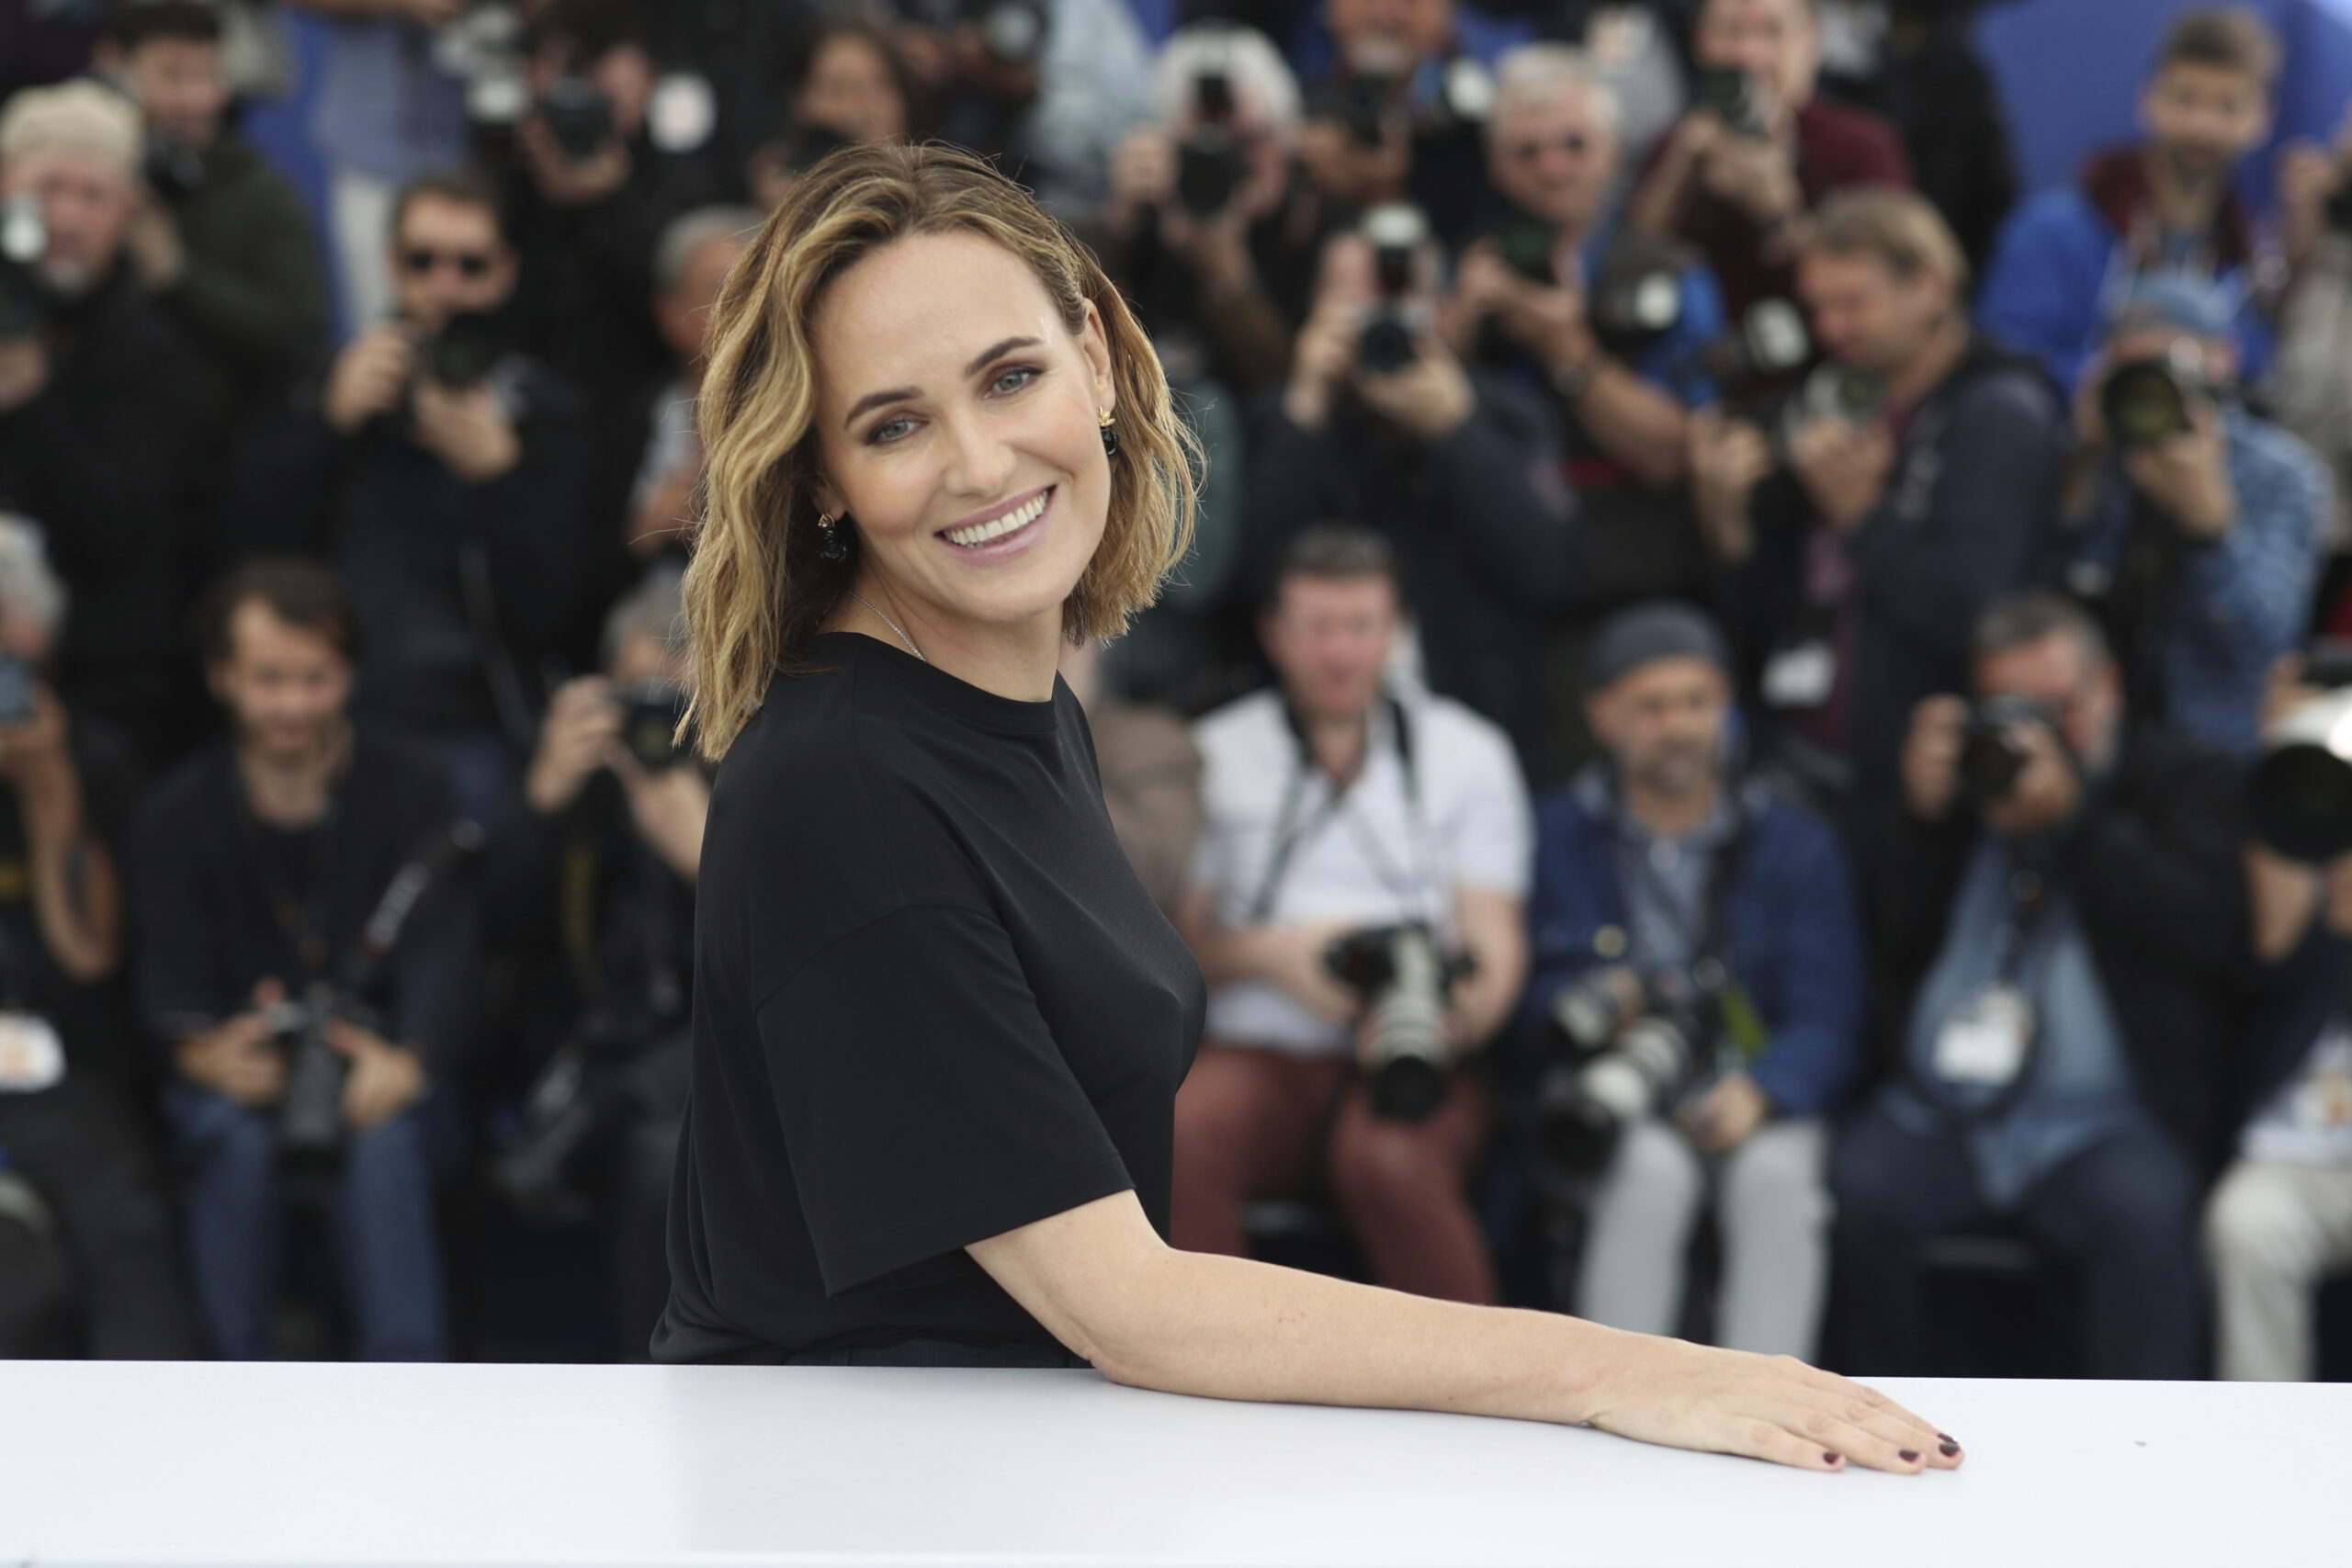 Actress Judith Godreche poses for photographers at the photo call for the film 'The Climb' at the 72nd international film festival, Cannes, southern France, Friday, May 17, 2019. (AP Photo/Petros Giannakouris)